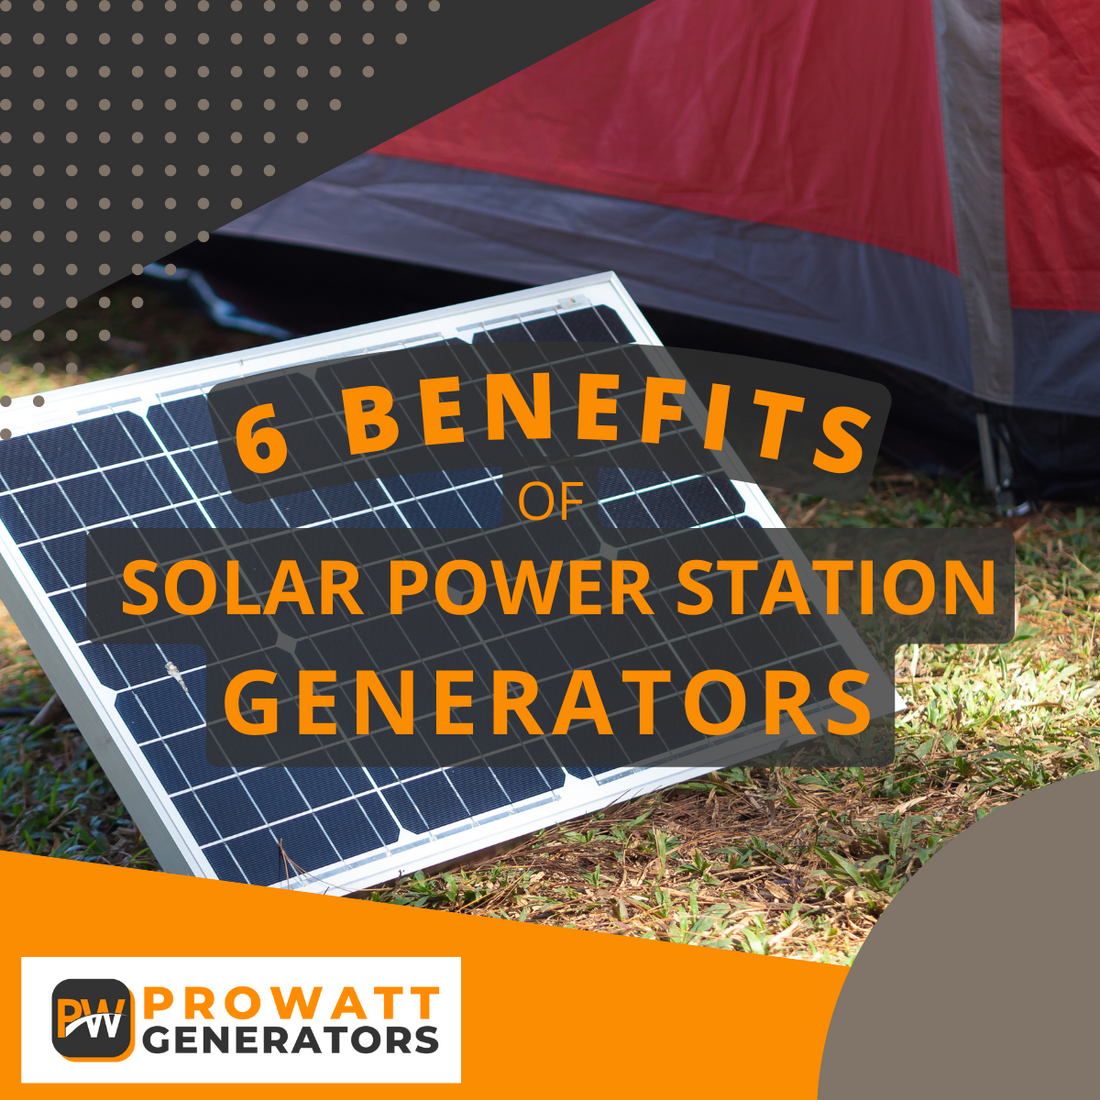 A guide to 6 benefits of Solar Power Station Generators and the best products to fit your needs.